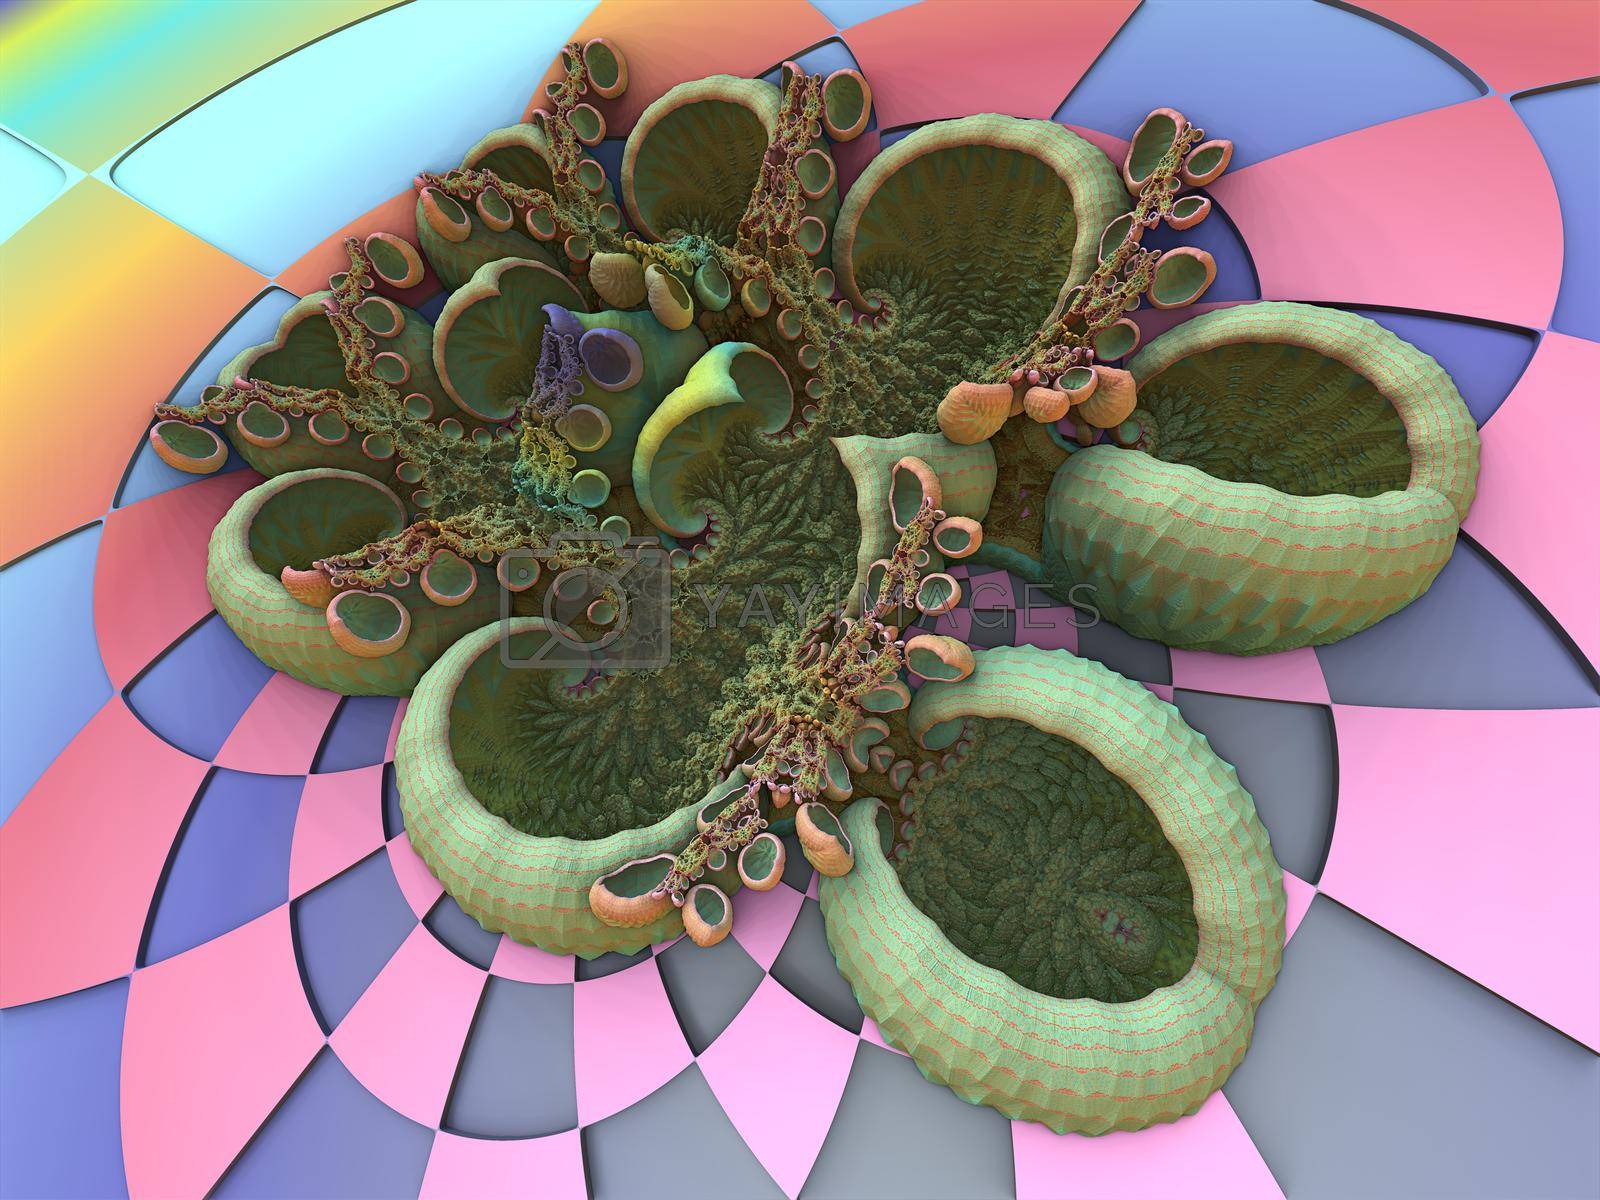 Royalty free image of three-dimensional fractal by Dr-Lange